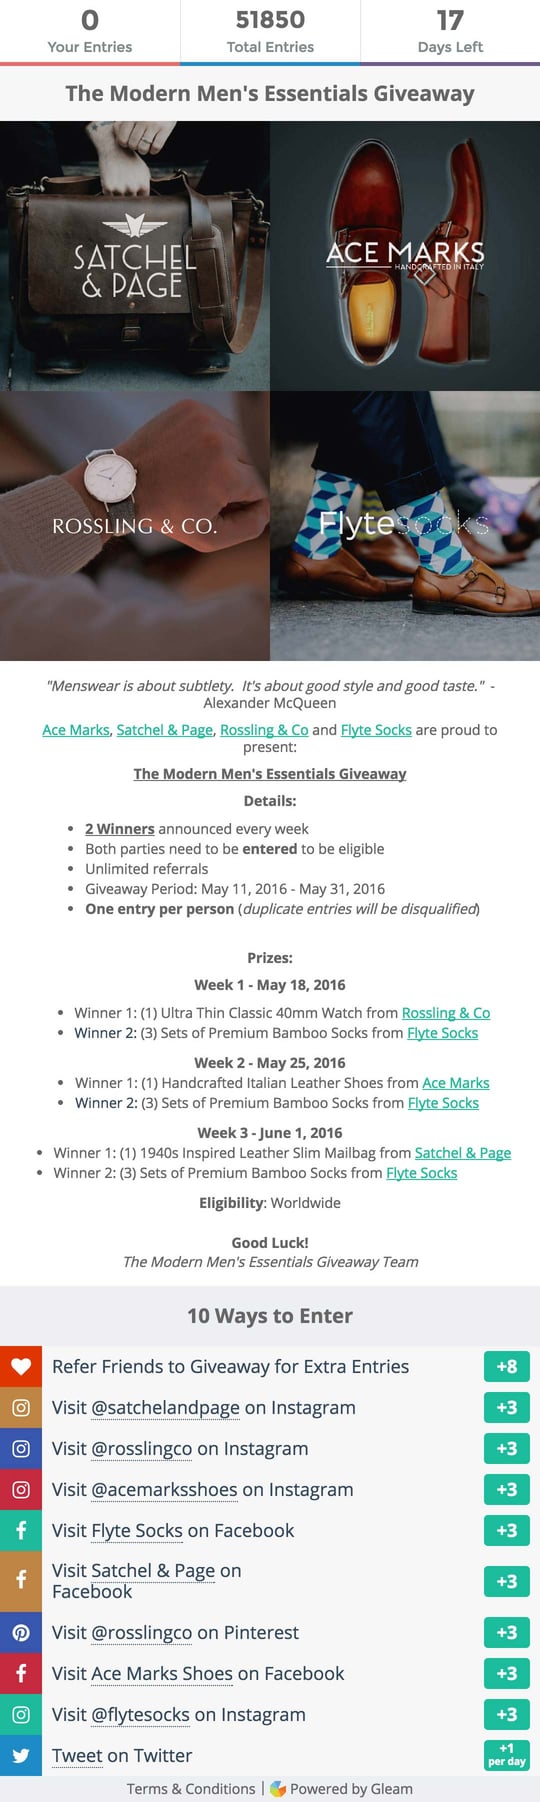 Flyte Sock's Gleam Competitions campaign widget